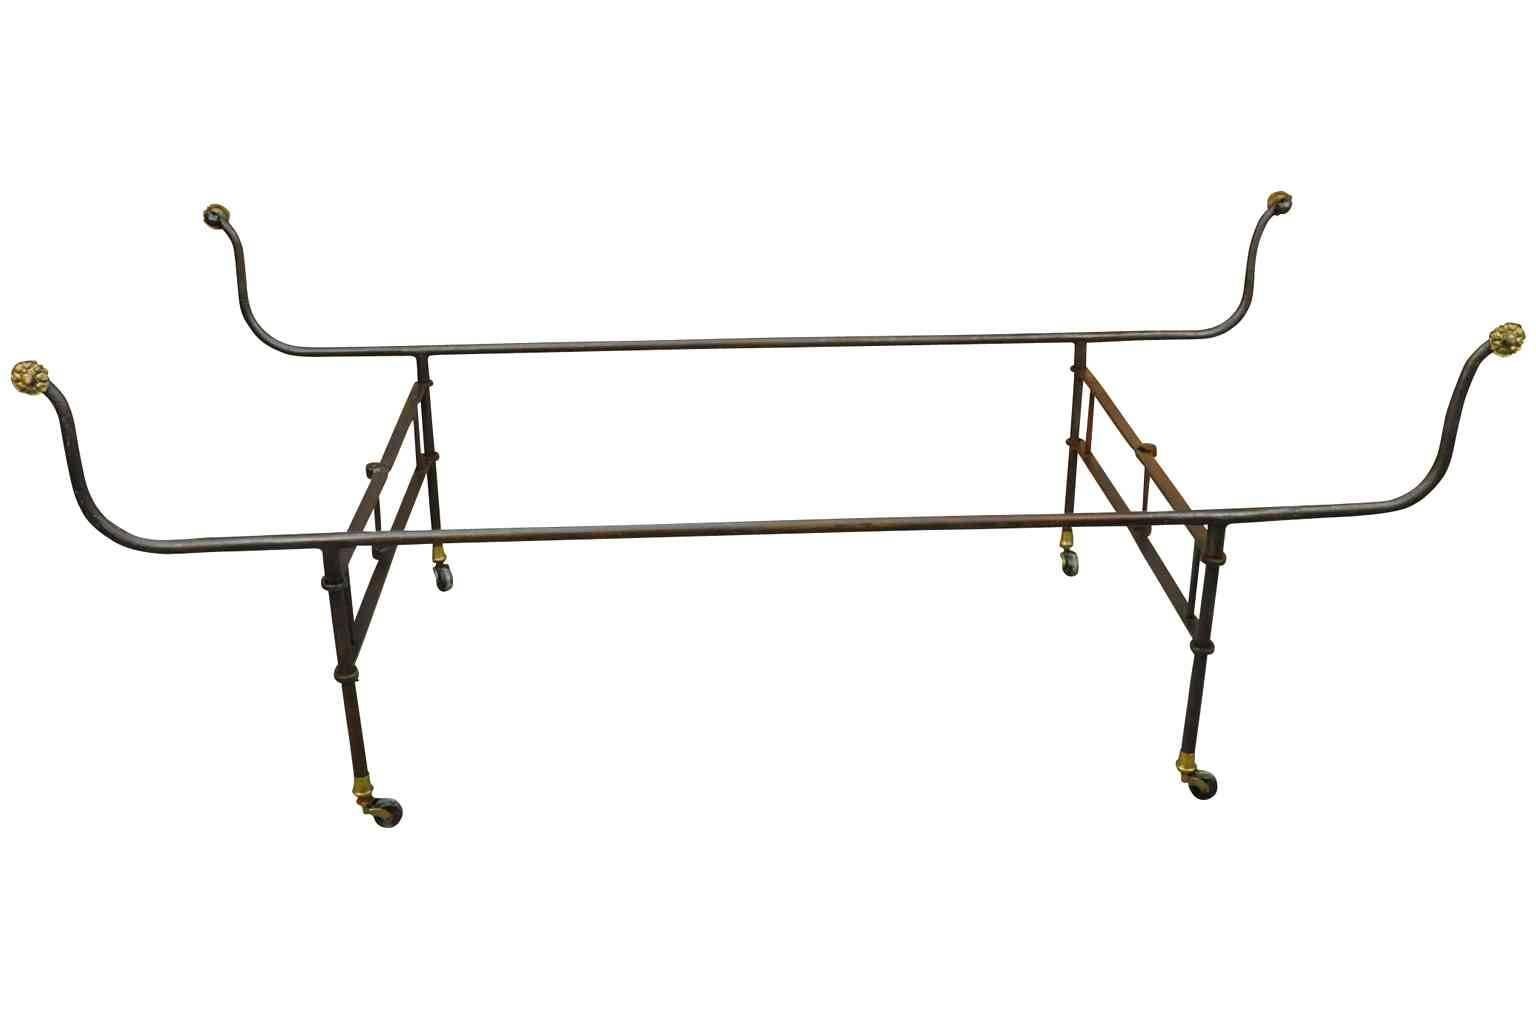 A very rare 19th century French collapsible Campaign bed in hand-forged iron with bronze medallions - on casters. This piece offers such versatility. Not only can it be used as a daybed, but collapsed in a narrower position, the piece can be